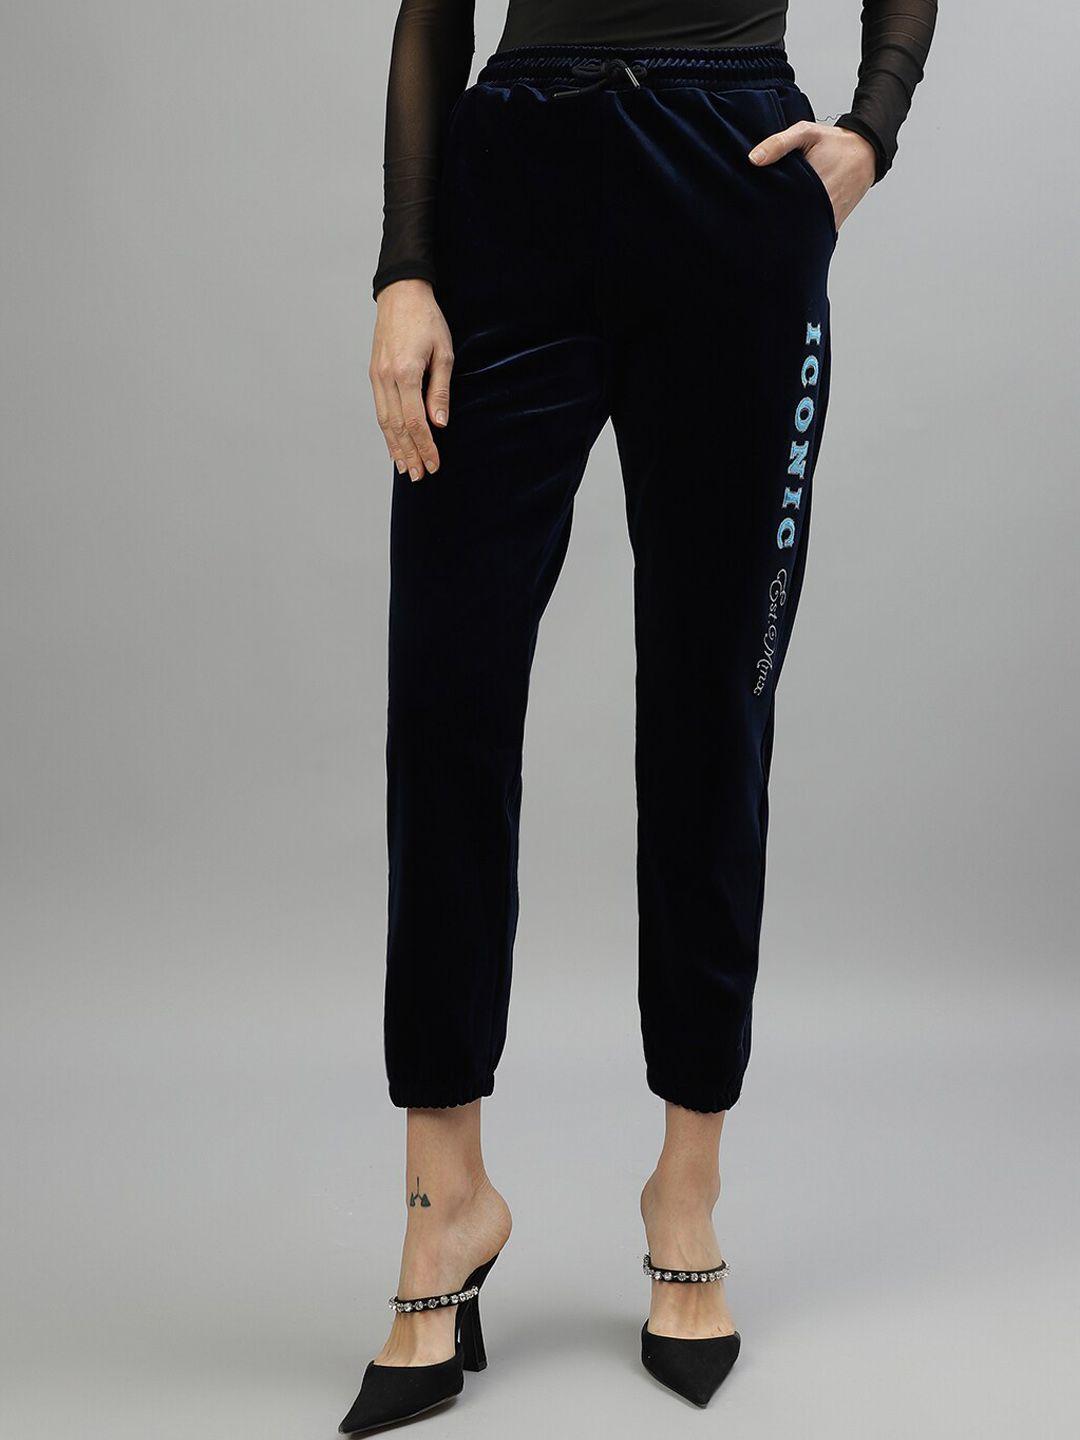 iconic women typography printed mid rise joggers